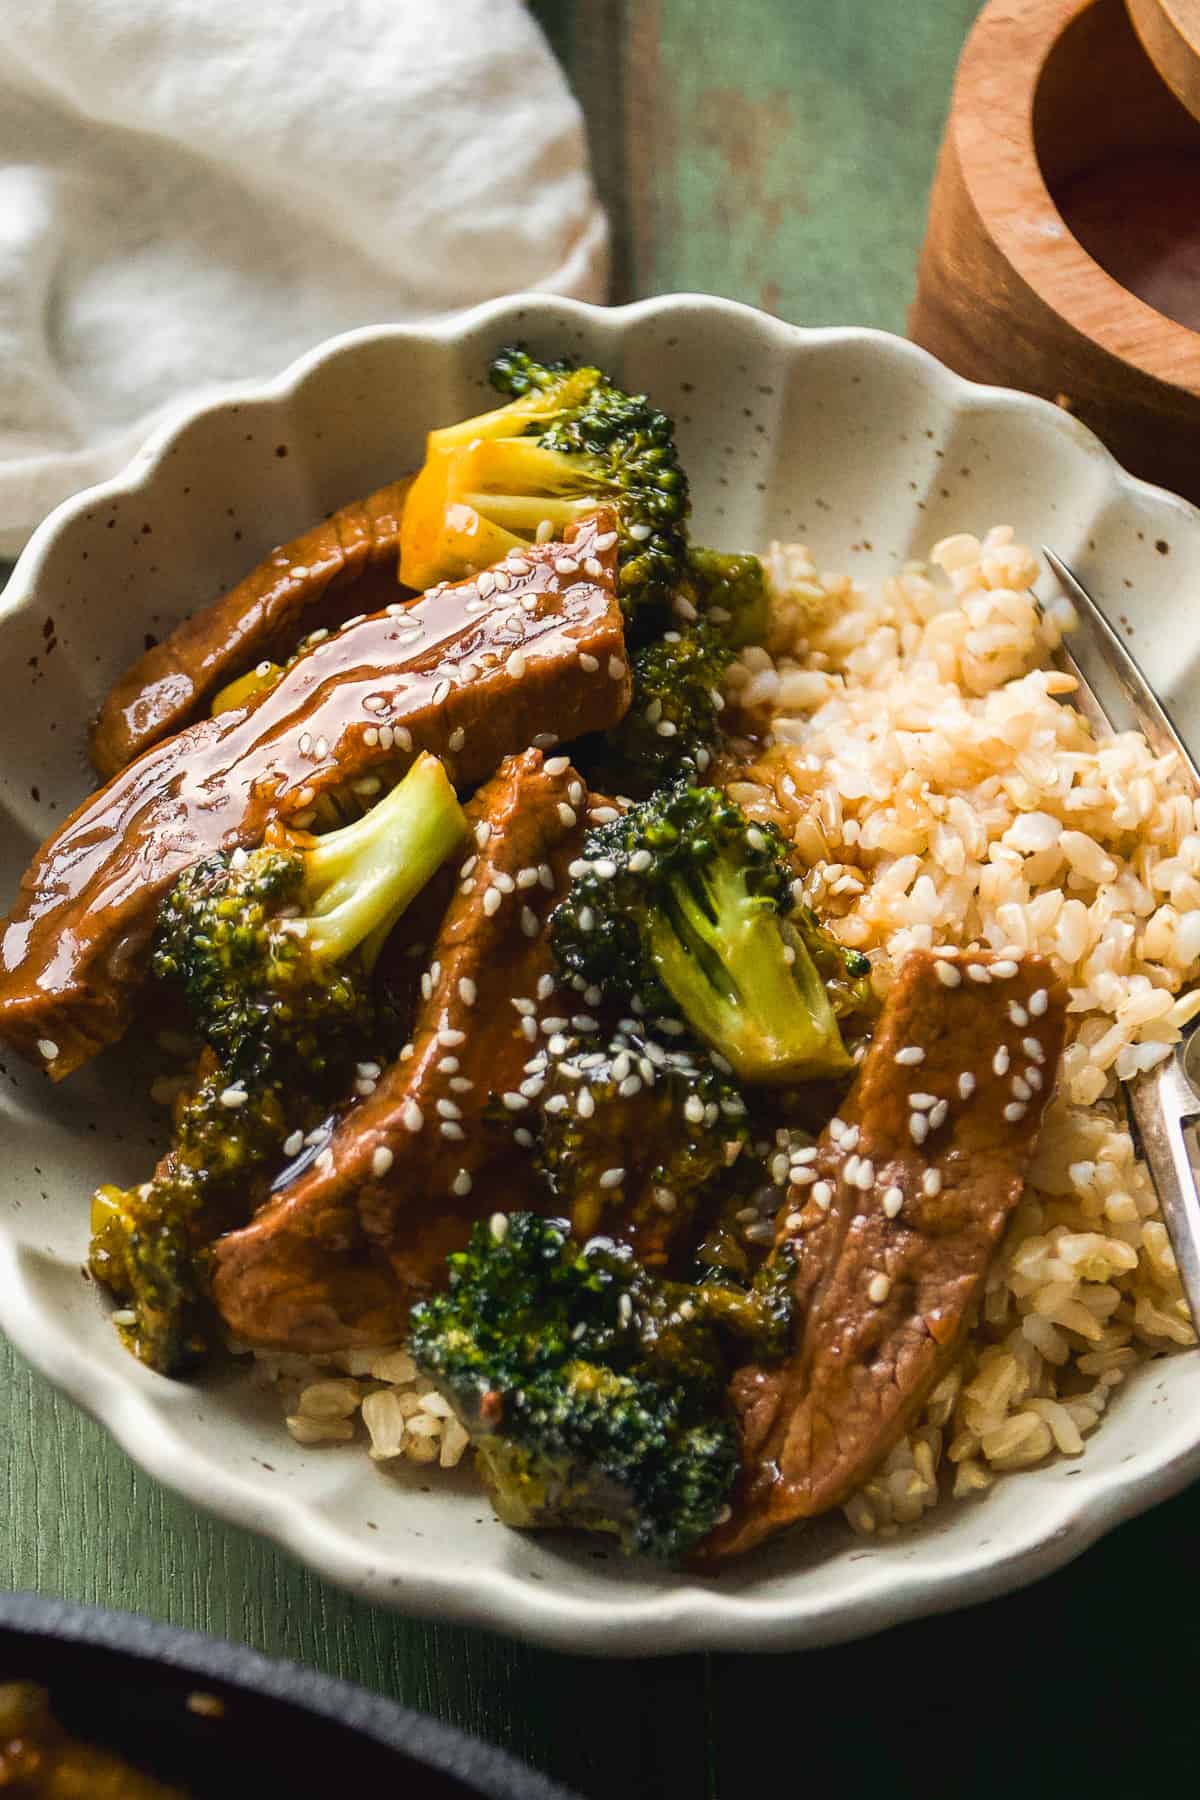 Beef and broccoli in a bowl with rice and sesame seeds.